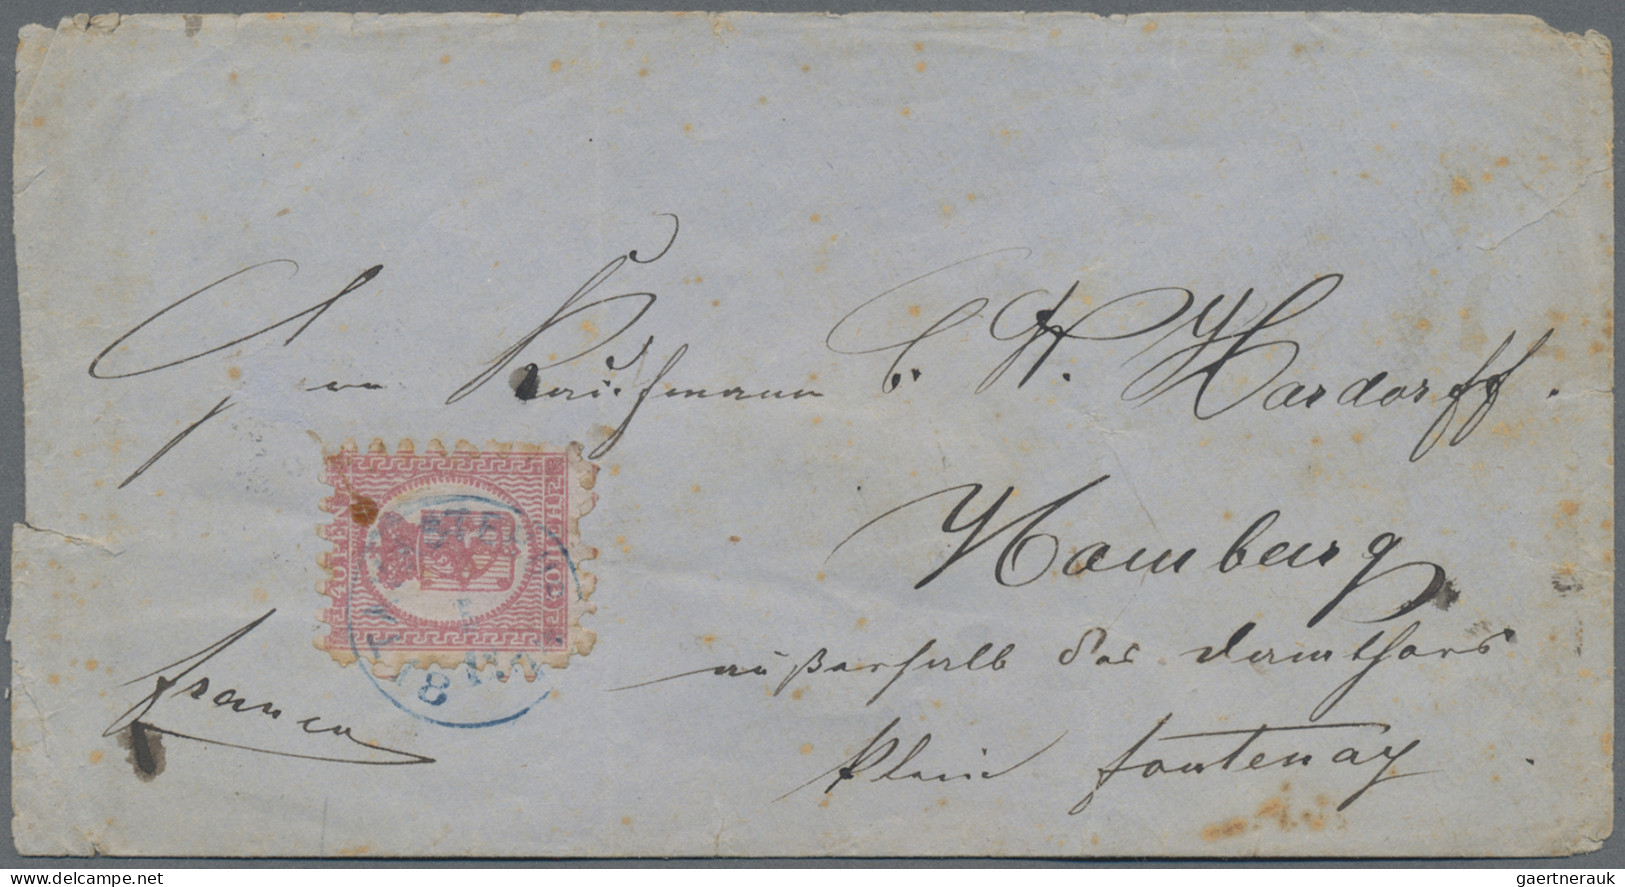 Finland: 1874, 40p. Rose-carmine, Single Franking On Cover From "TAVASTEHUS" To - Covers & Documents